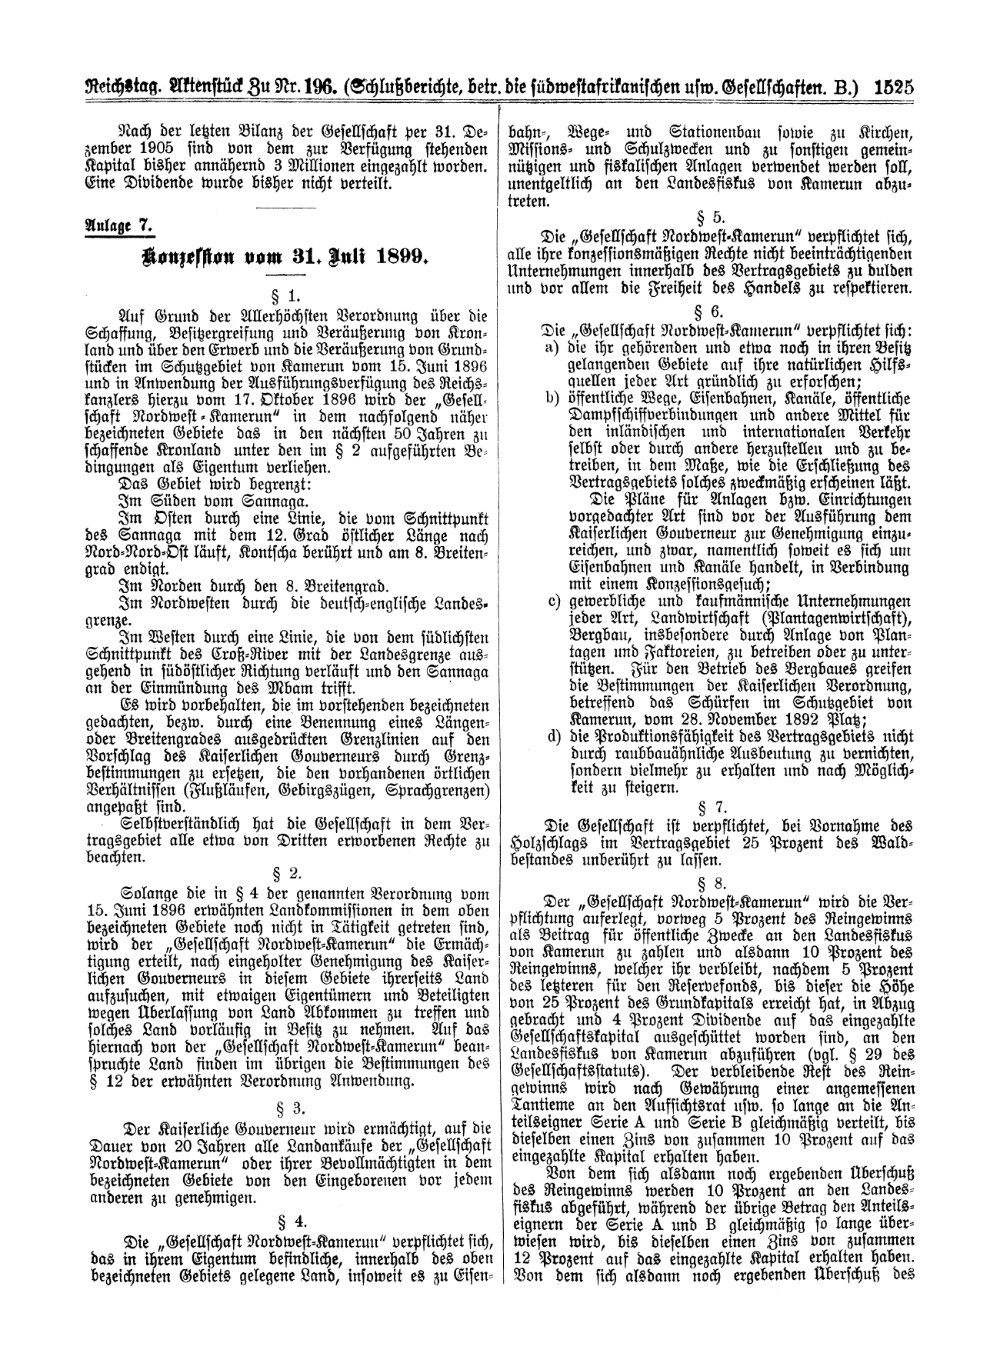 Scan of page 1525